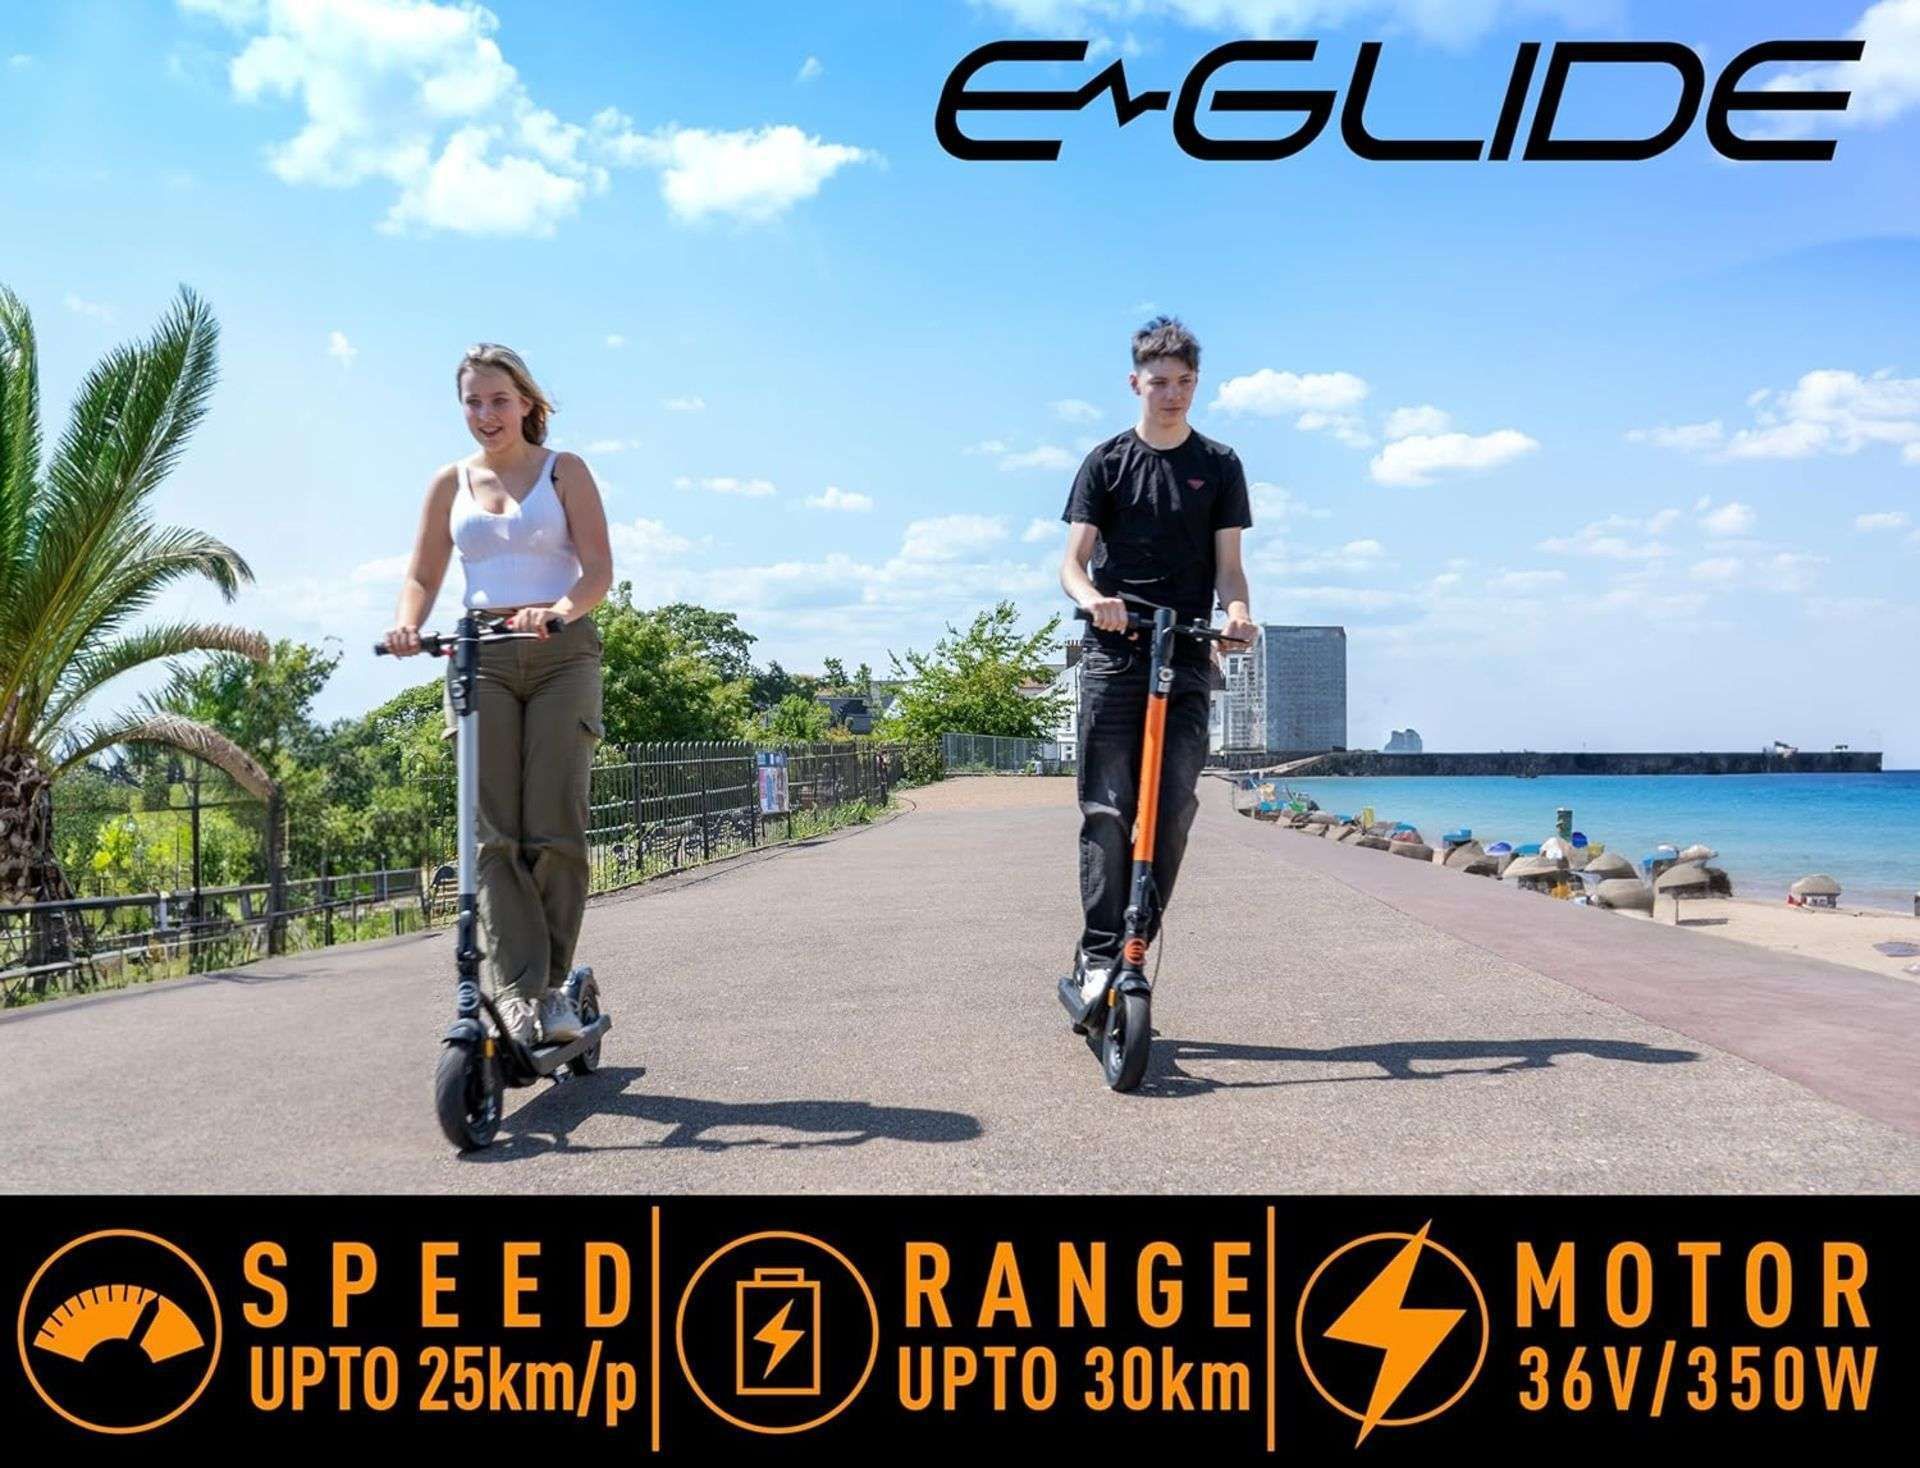 Trade Lot 4 x Brand New E-Glide V2 Electric Scooter Grey and Black RRP £599, Introducing a sleek and - Image 3 of 5